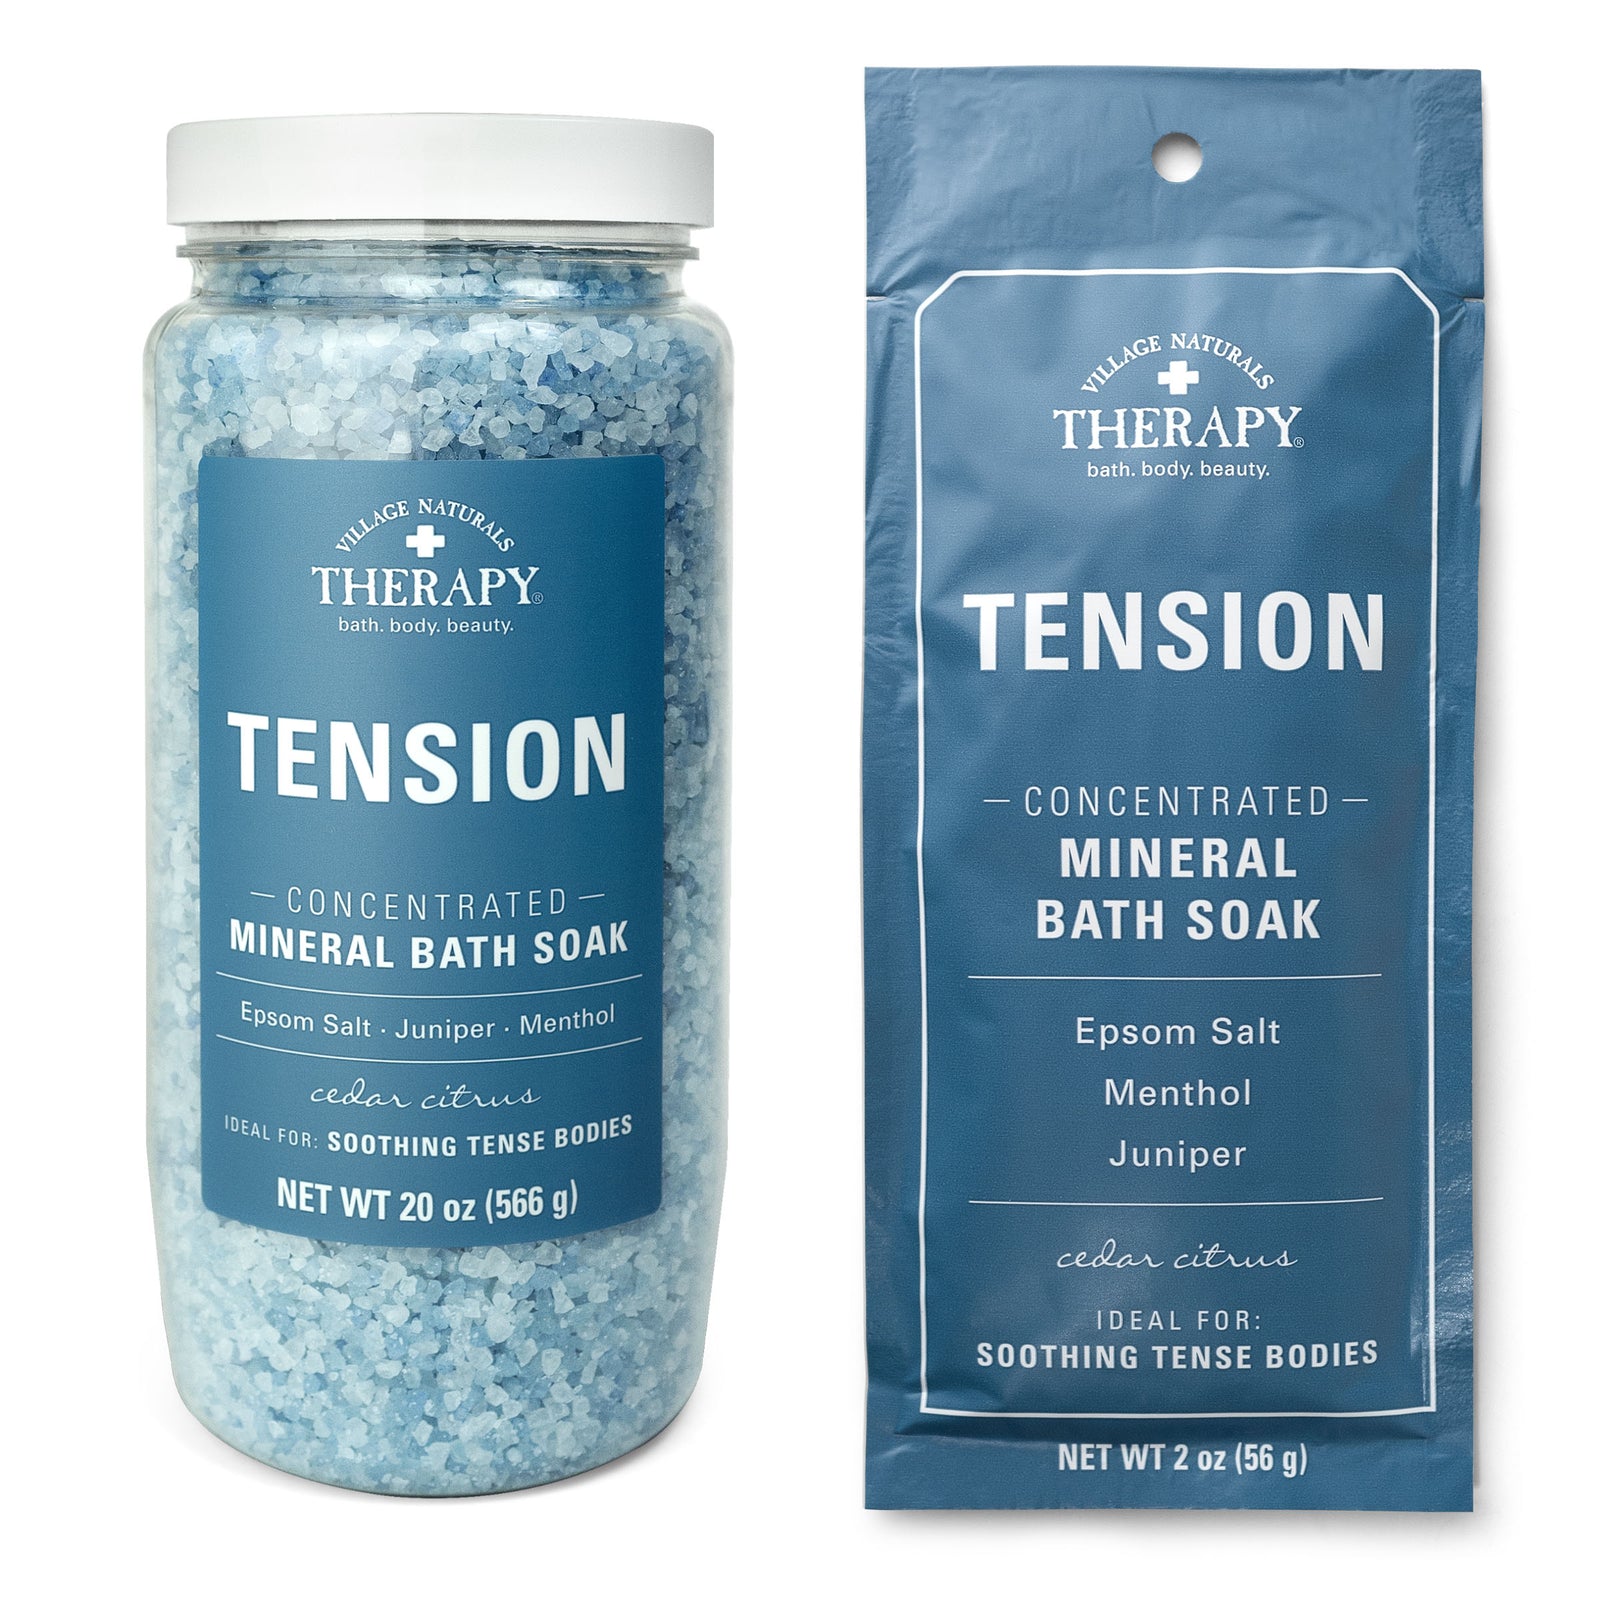 Tension Concentrated Mineral Bath Soak